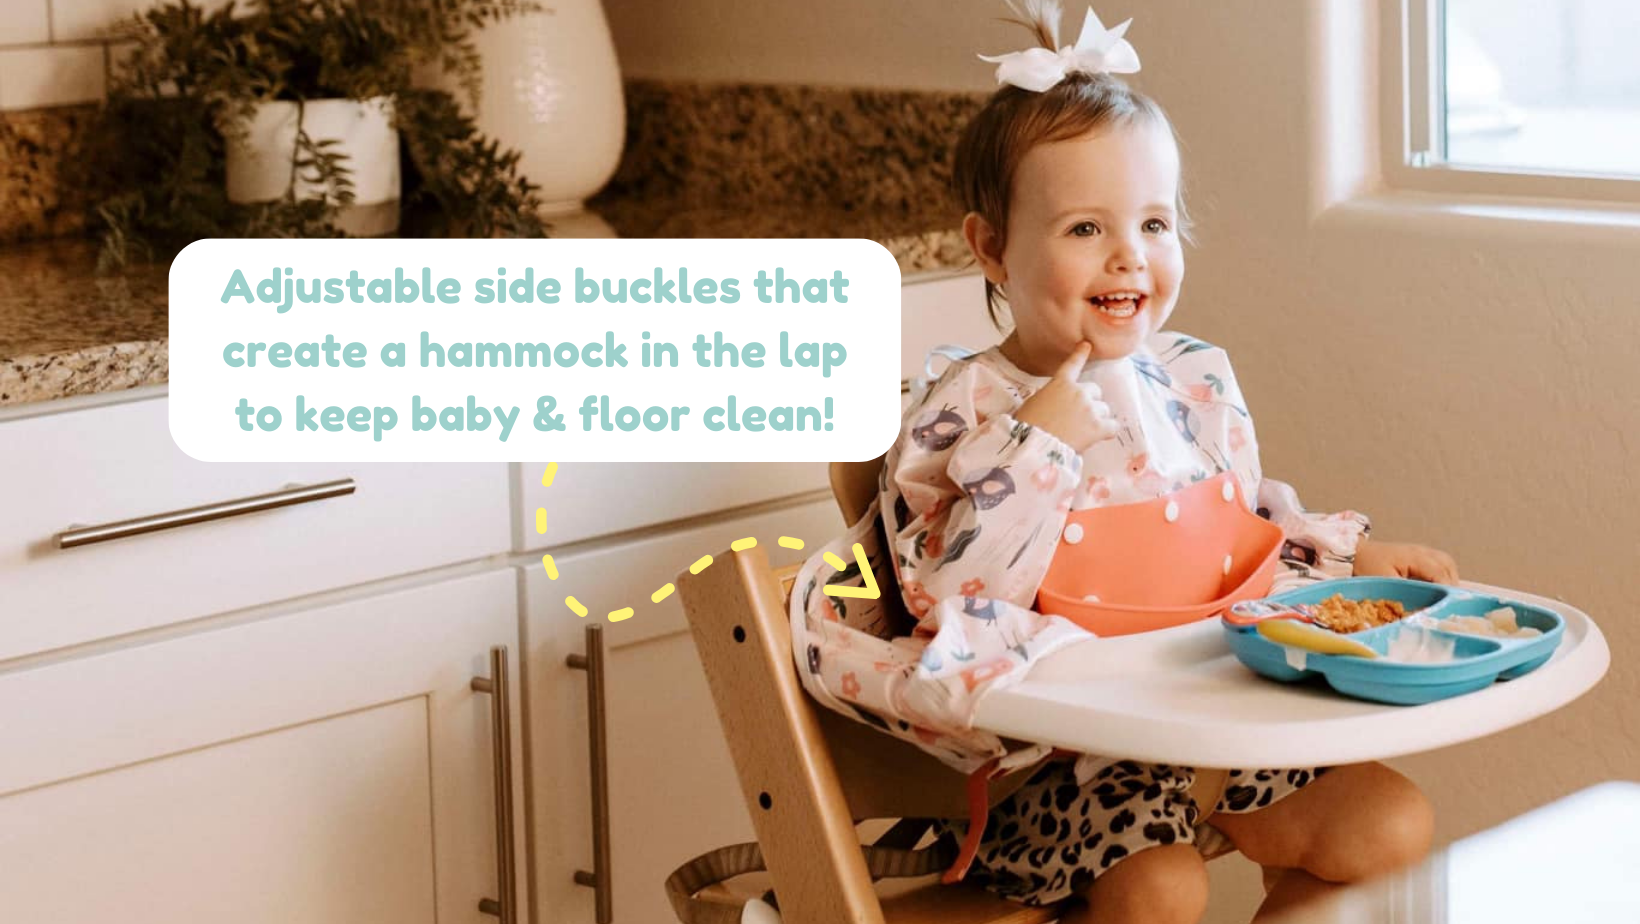 Smiling baby in high chair wearing a Bibvy bib with floral peach design and adjustable side buckles that create a hammock to catch food